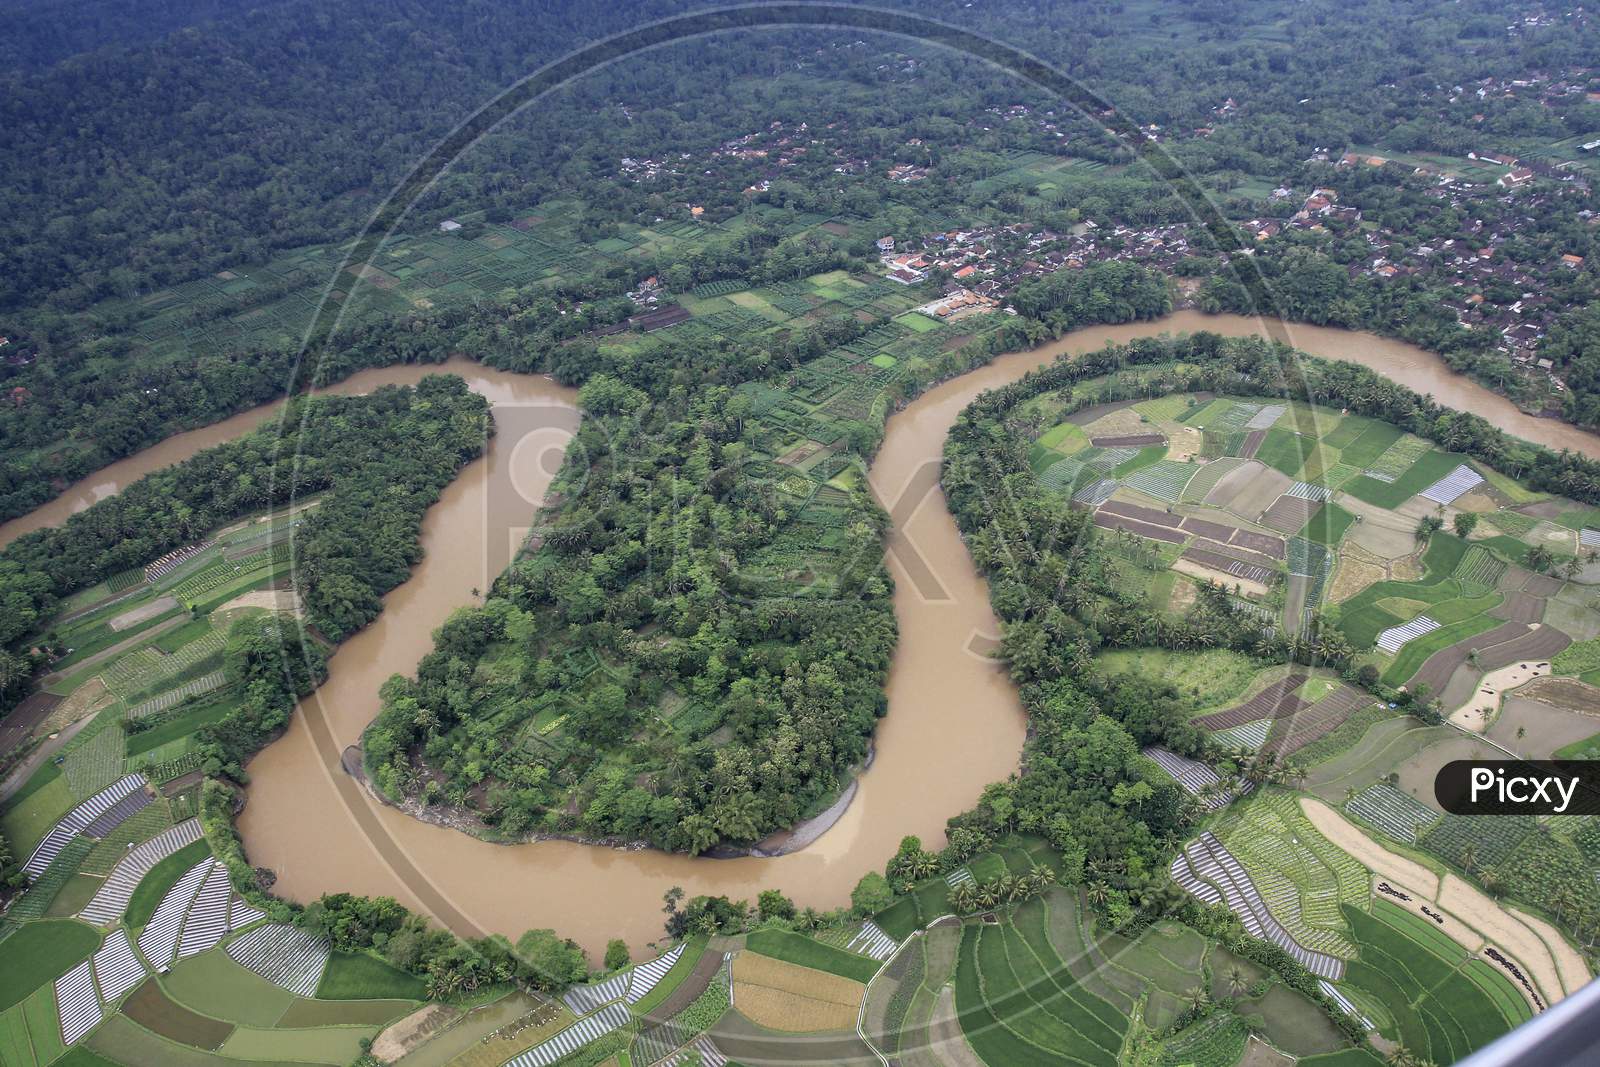 Kulonprogo landscapes is still green, natural harmony between the Progo river and the rice fields